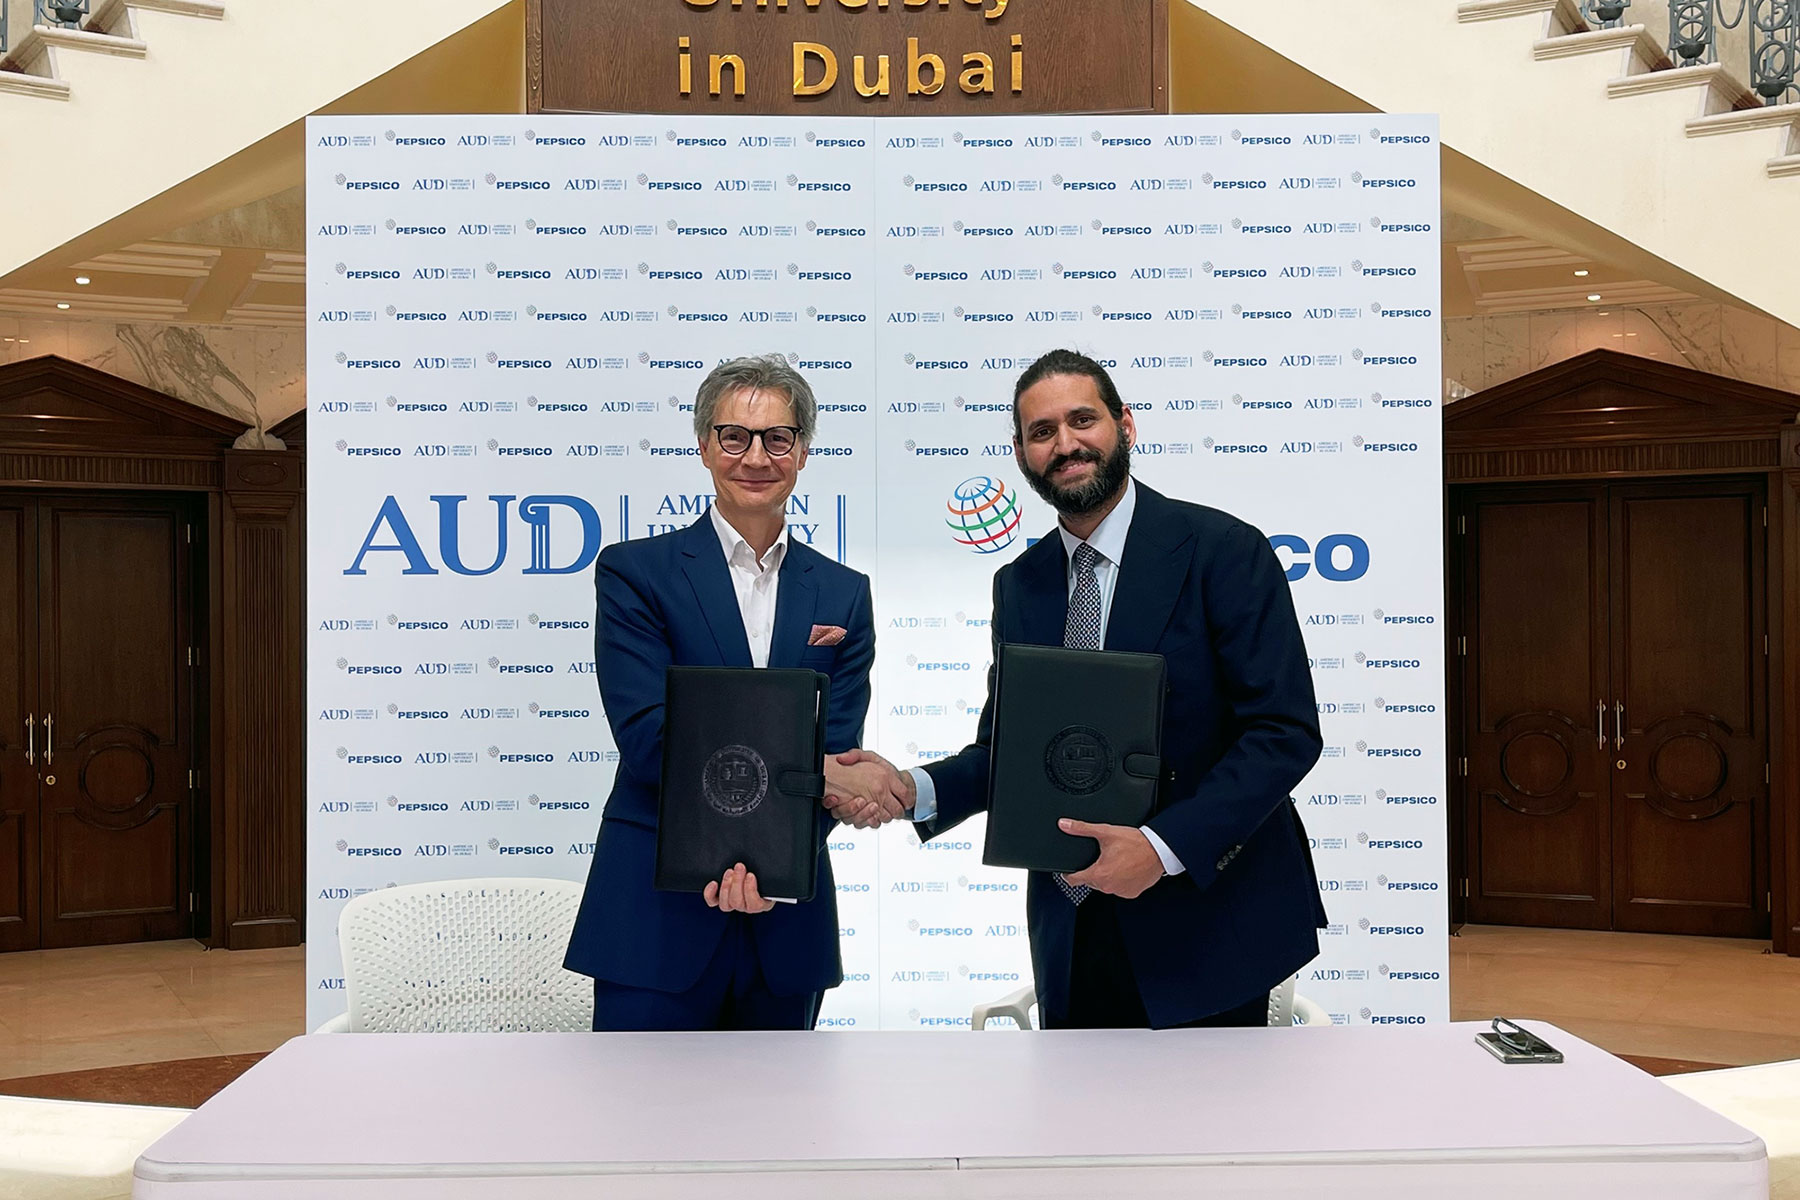 A cooperative agreement between "AUD" and "PepsiCo," to focus on sustainability